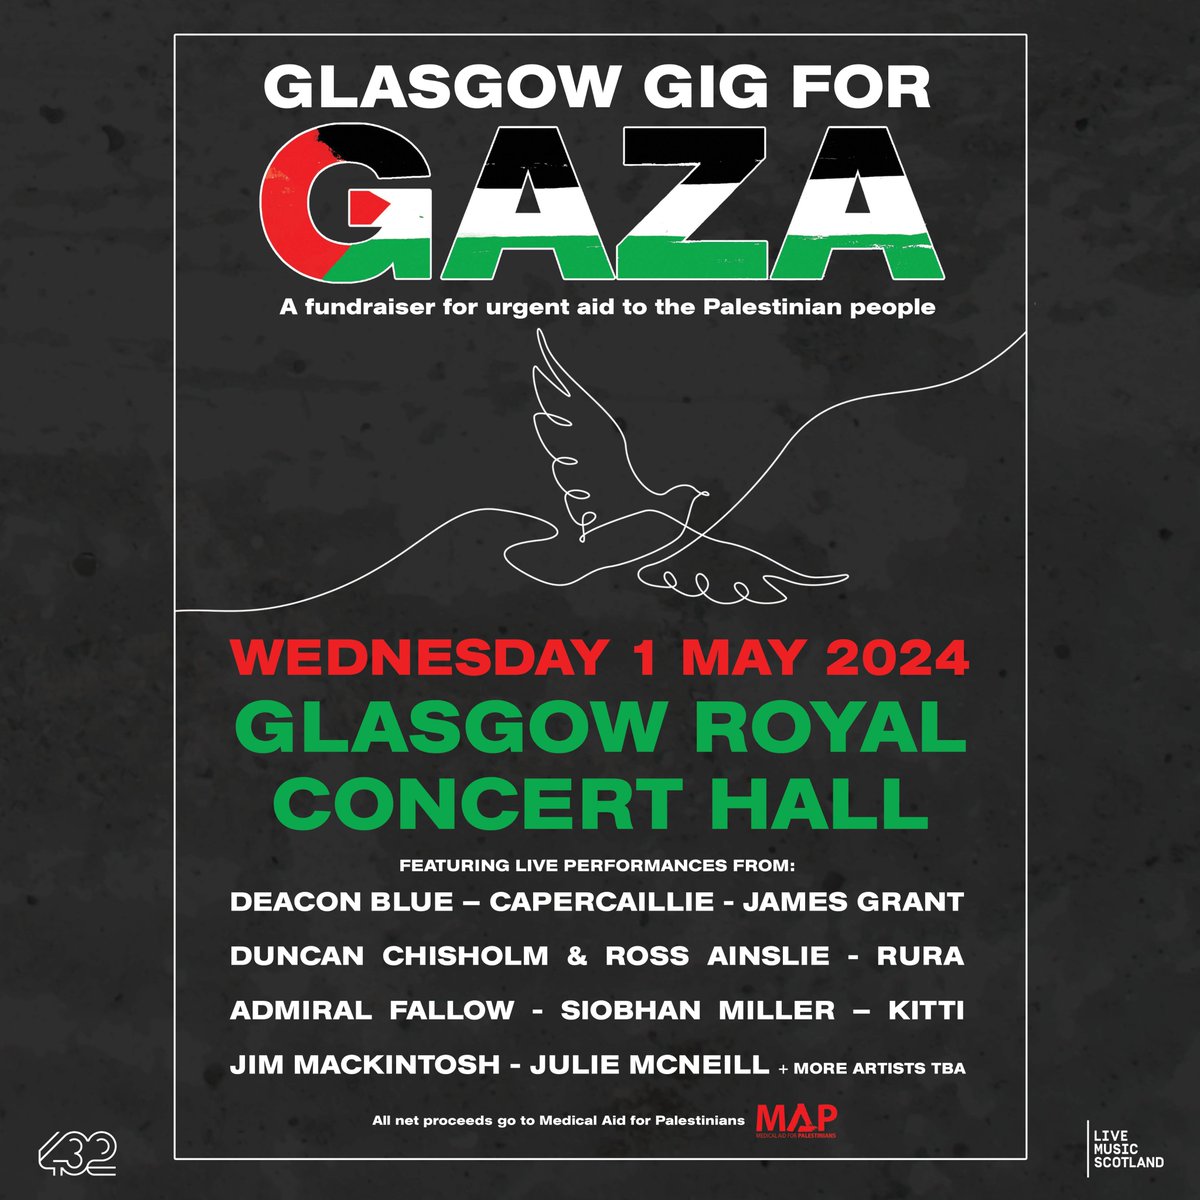 Deacon Blue will headline the Glasgow Gig for Gaza, a fundraiser supporting the charity @medicalaidpal, at the Glasgow Royal Concert Hall on Wednesday 1st May. Tickets are on sale now here: tickets.glasgowlife.org.uk/33110/33111. 🧵 1/4